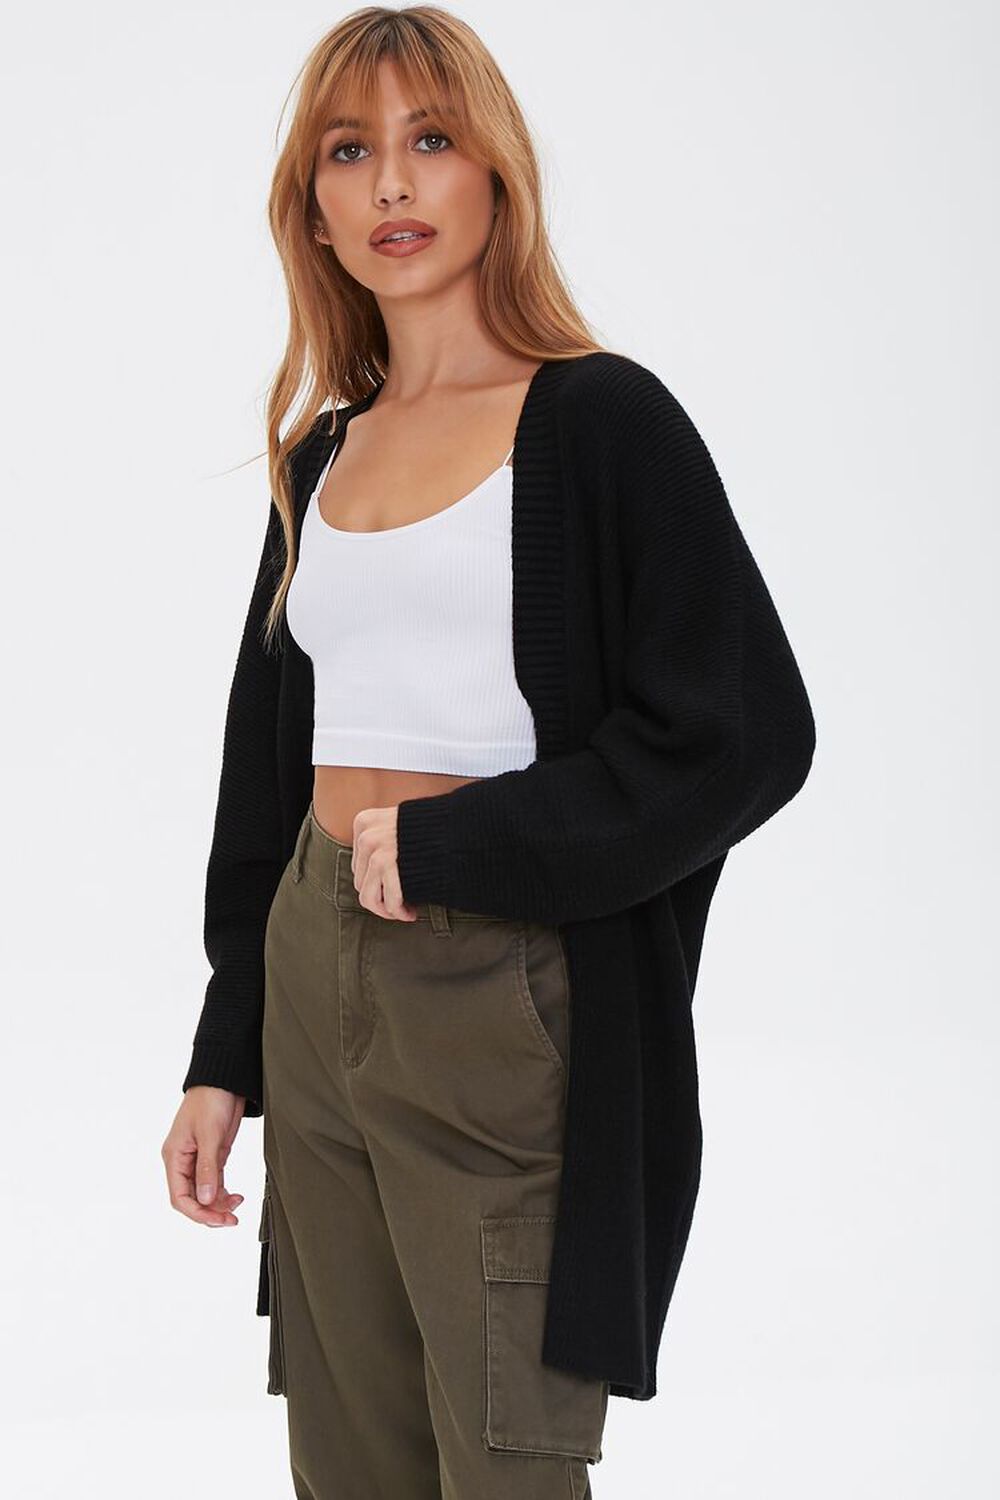 BLACK Open-Front Cardigan Sweater, image 1